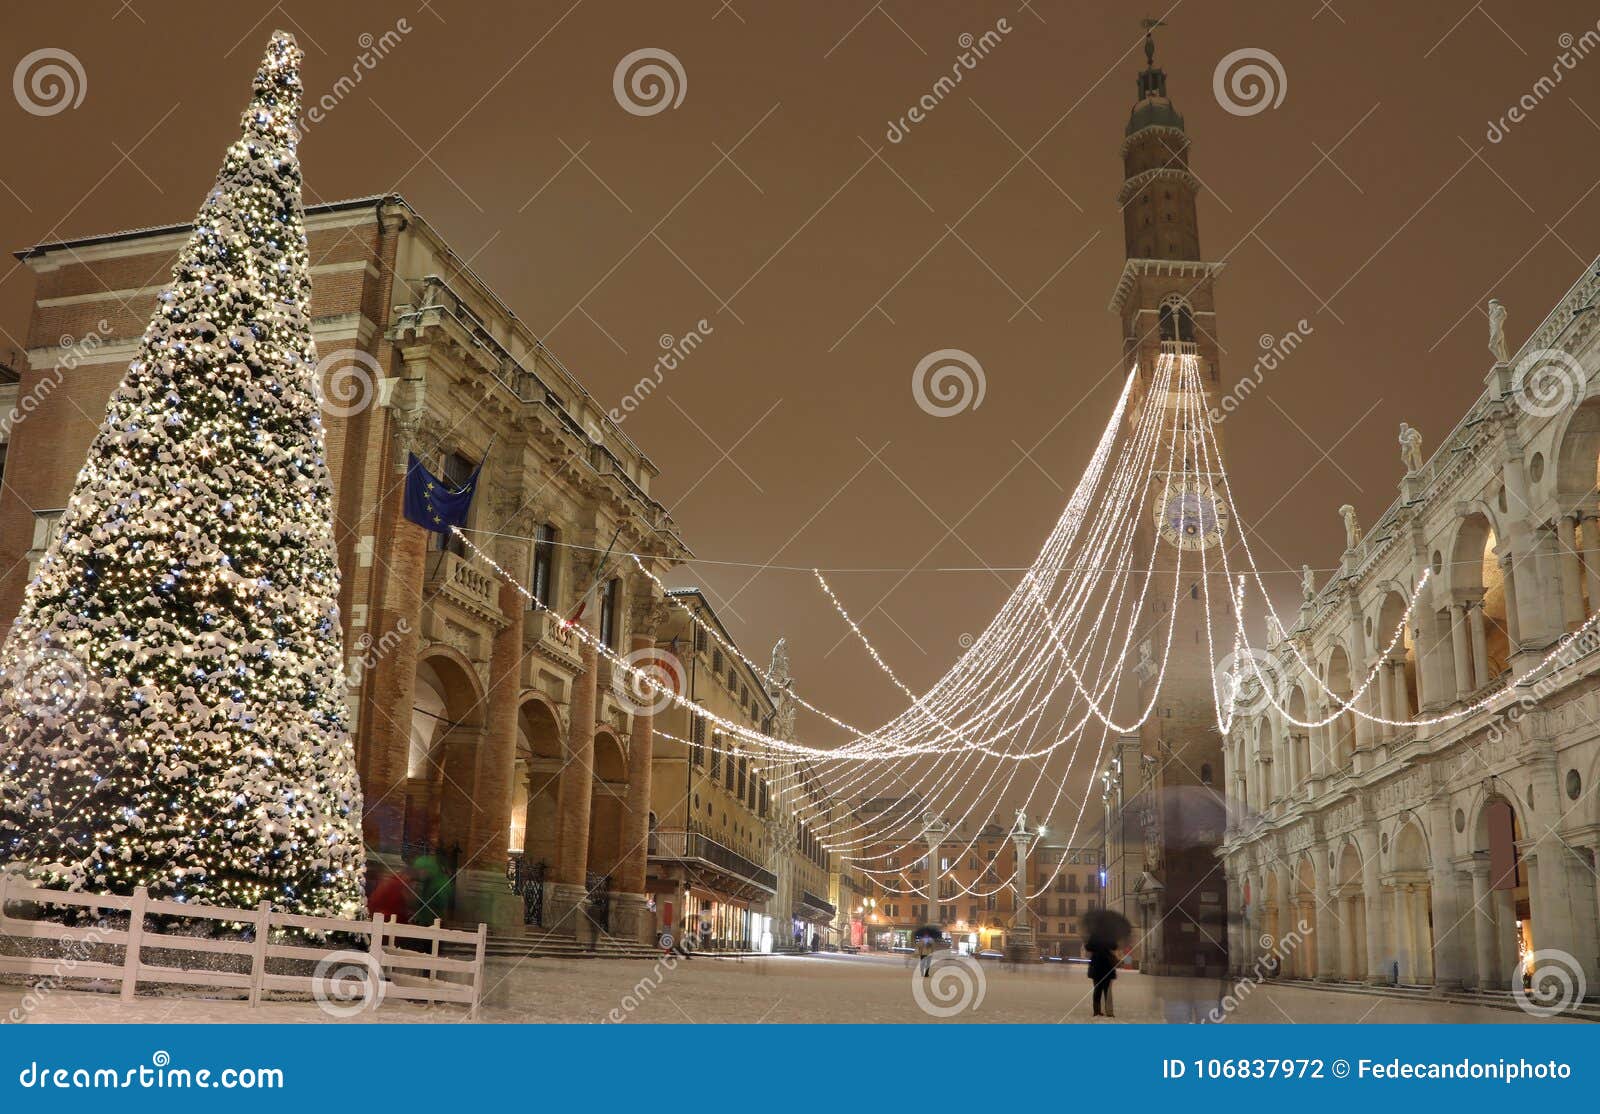 big christmas tree with snow in vicenza in italy